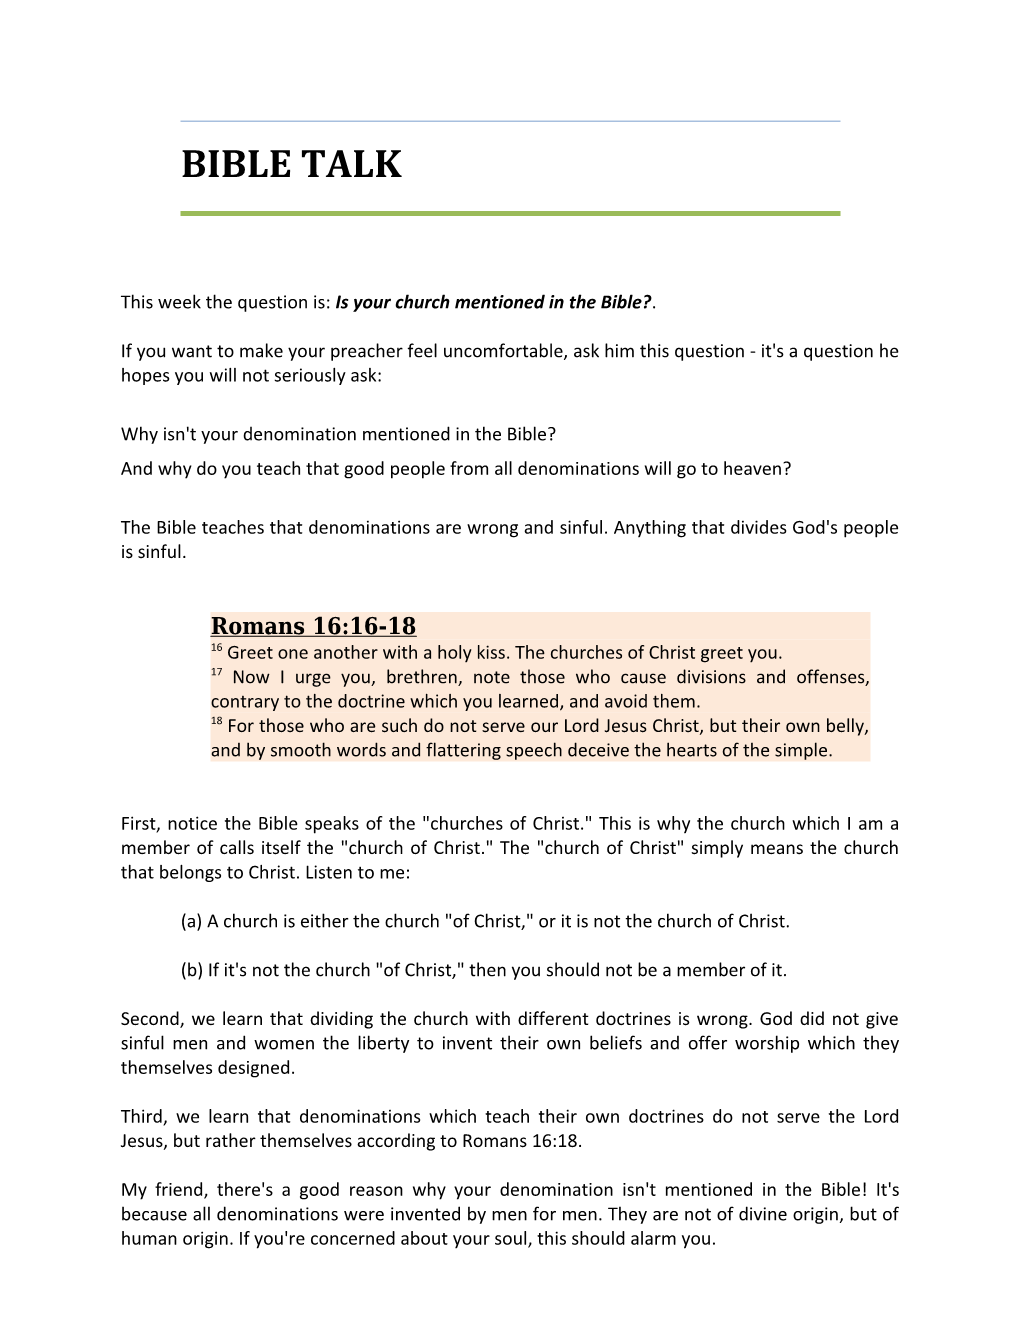 This Week the Question Is: Is Your Church Mentioned in the Bible?